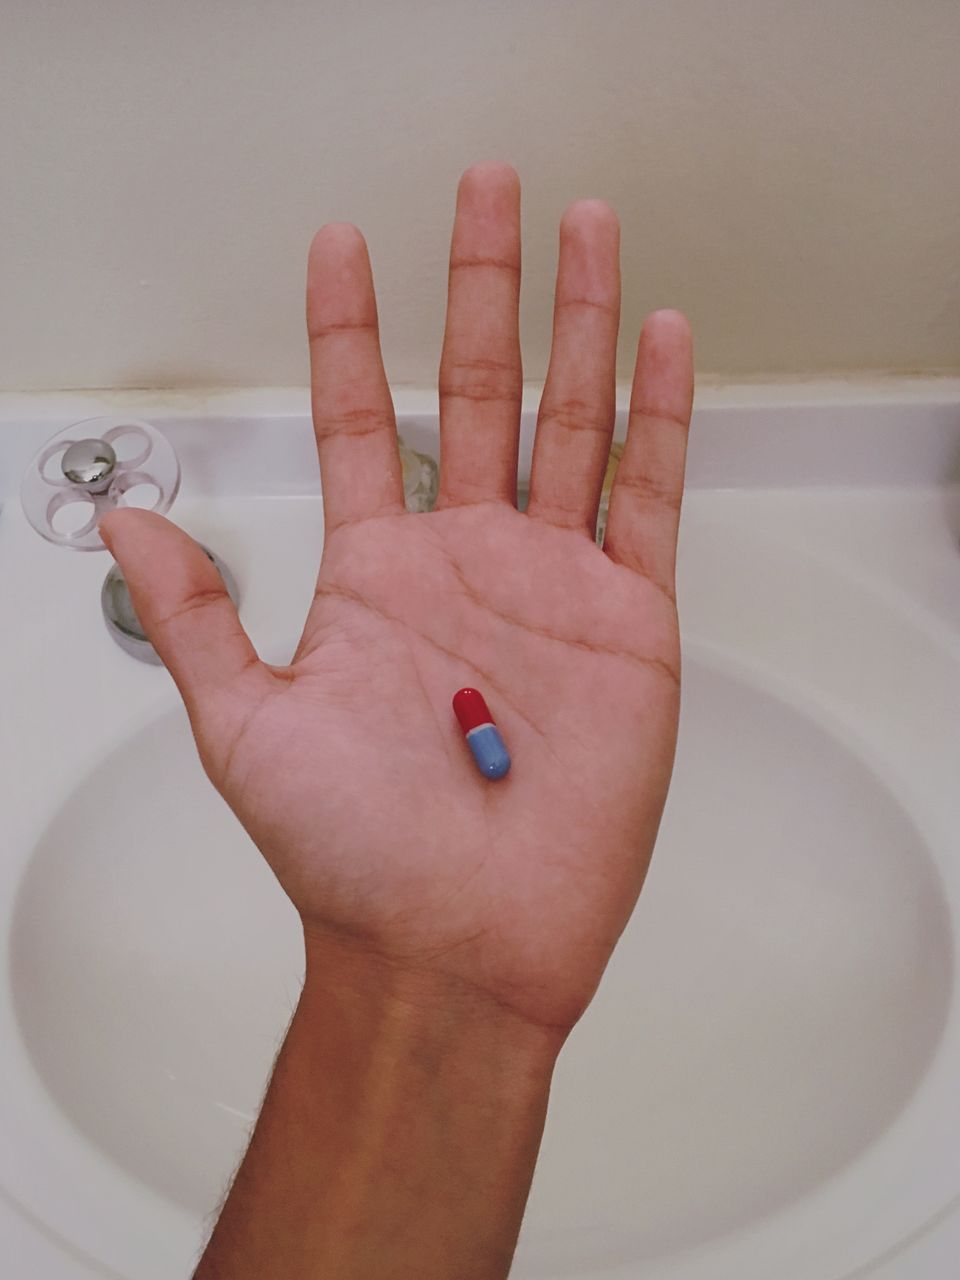 Human hand holding pill in bathroom